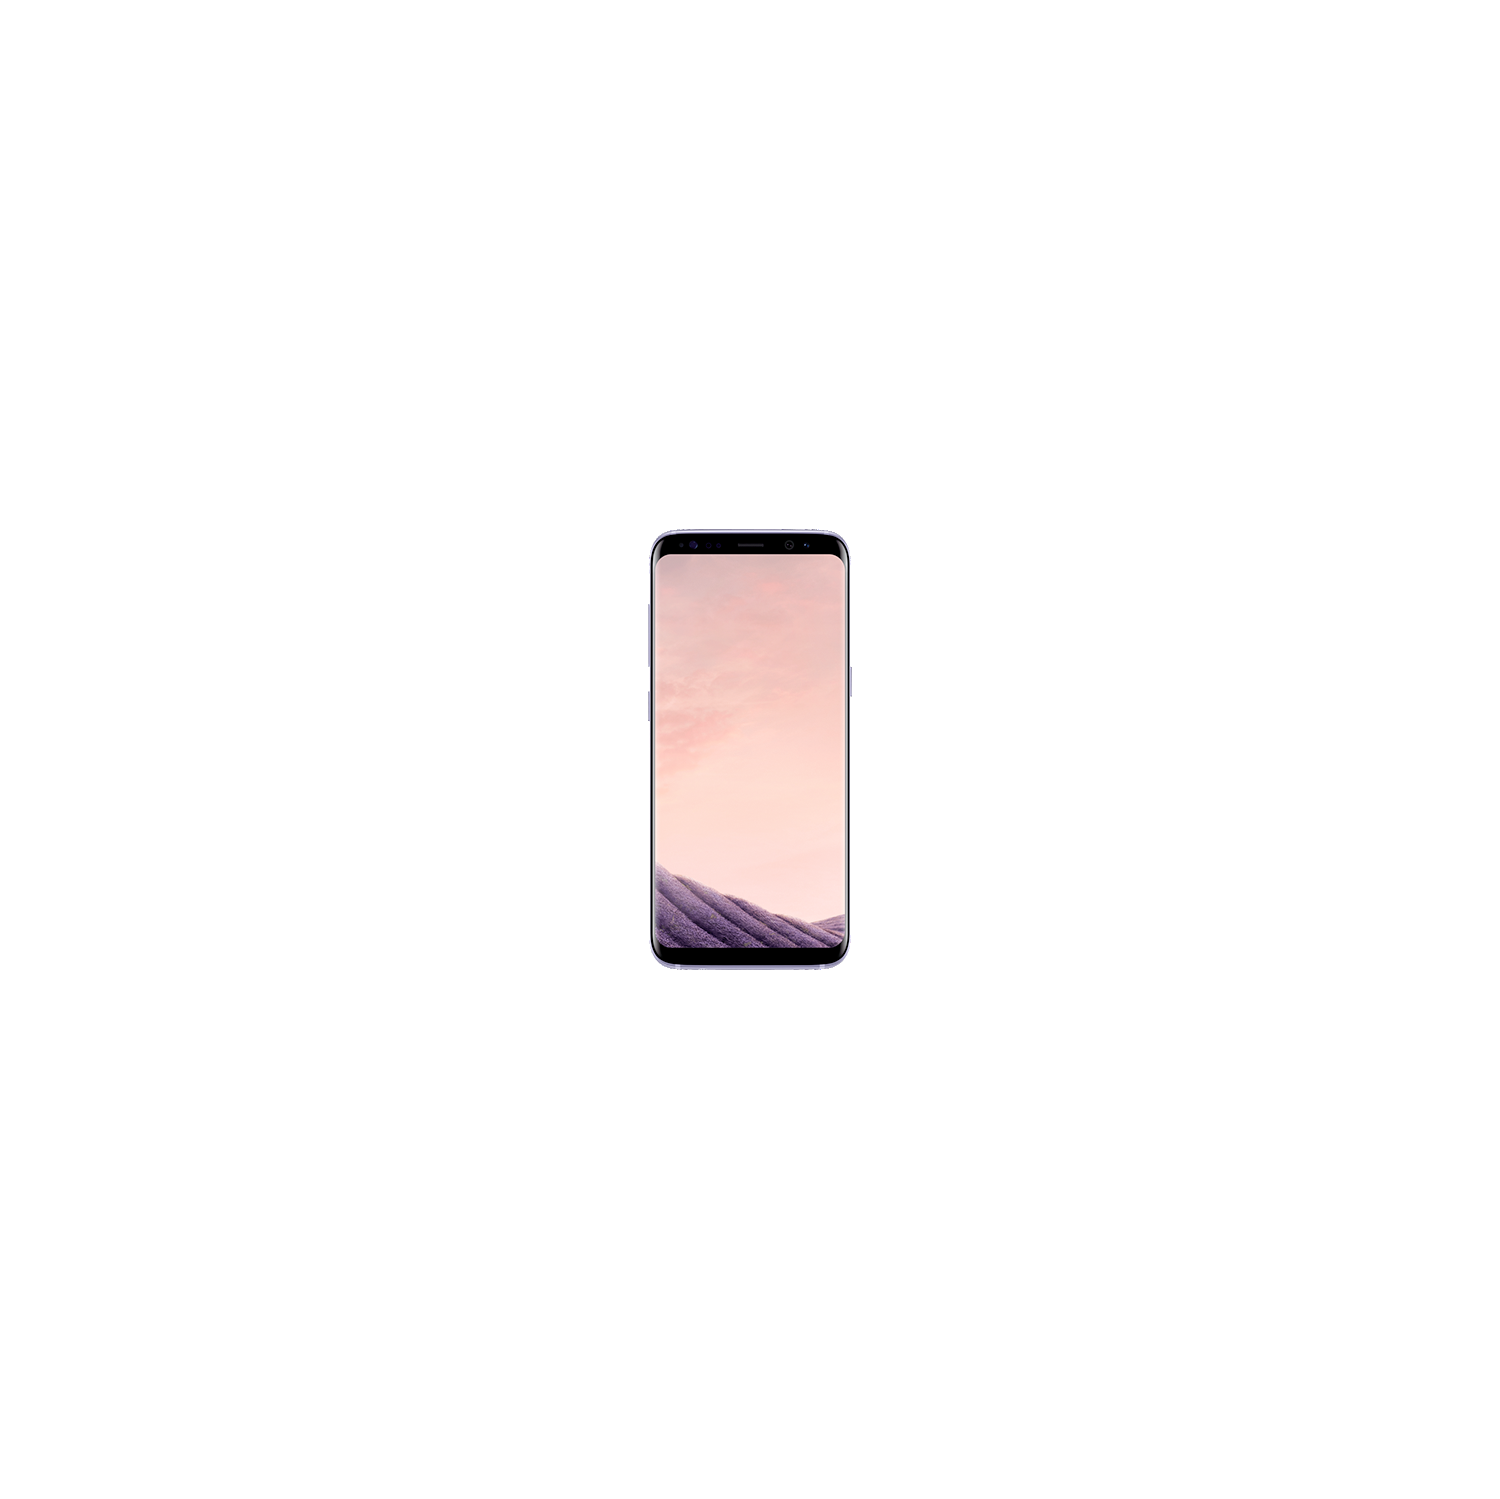 Refurbished (Excellent) - Samsung Galaxy S8 64GB Smartphone - Orchid Gray - Unlocked - Certified Refurbished